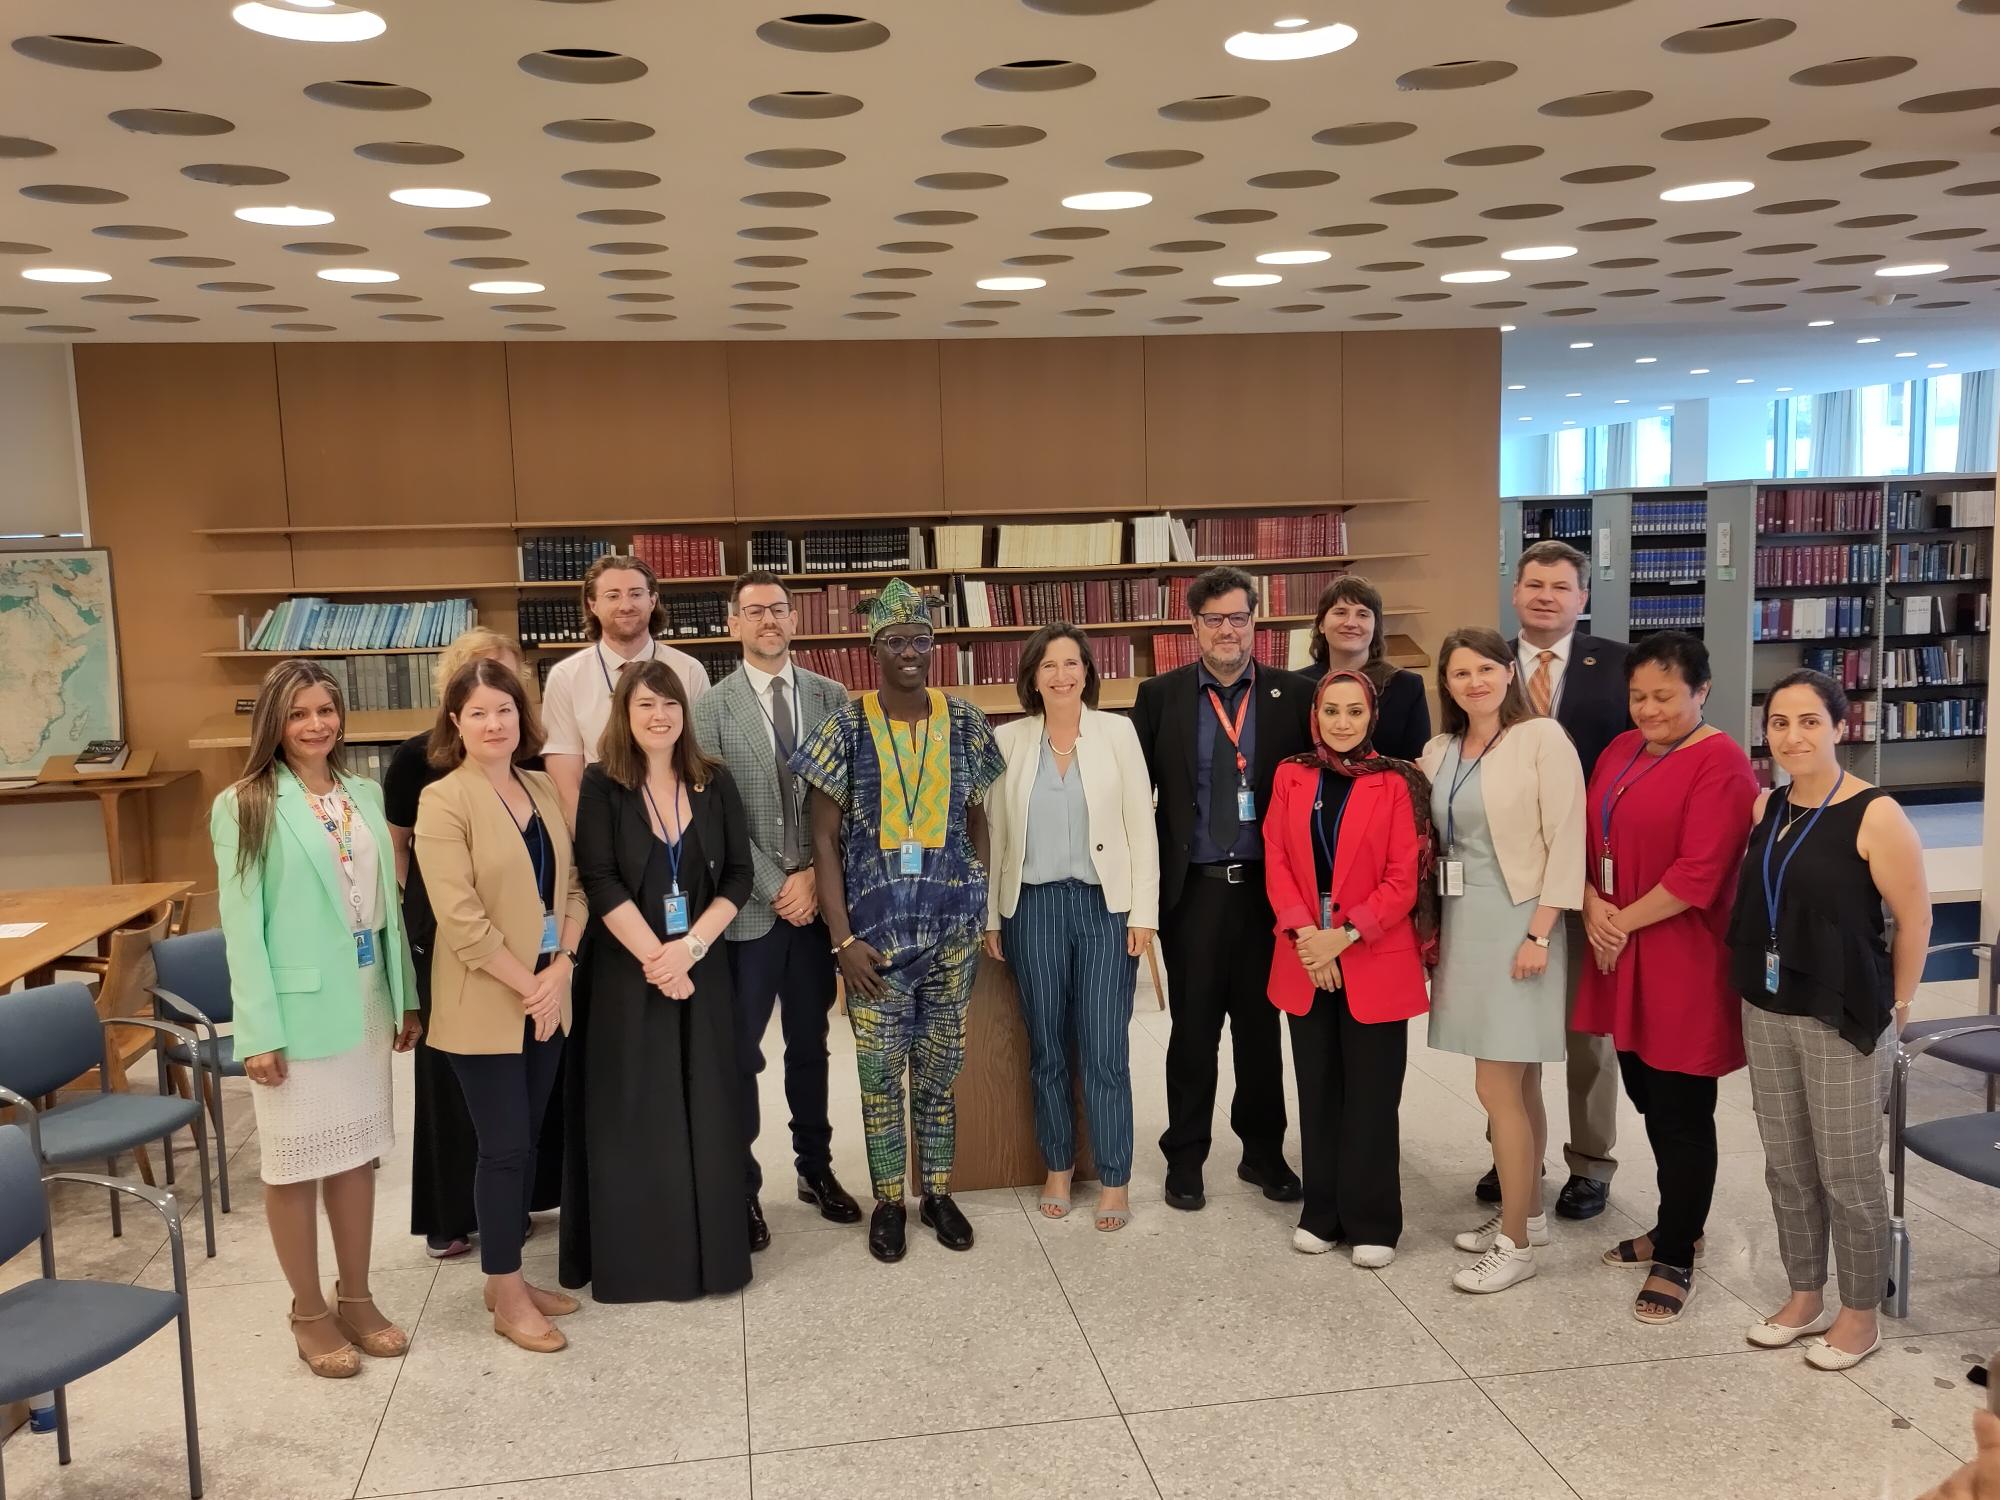 Group of people posing for a photo in a library